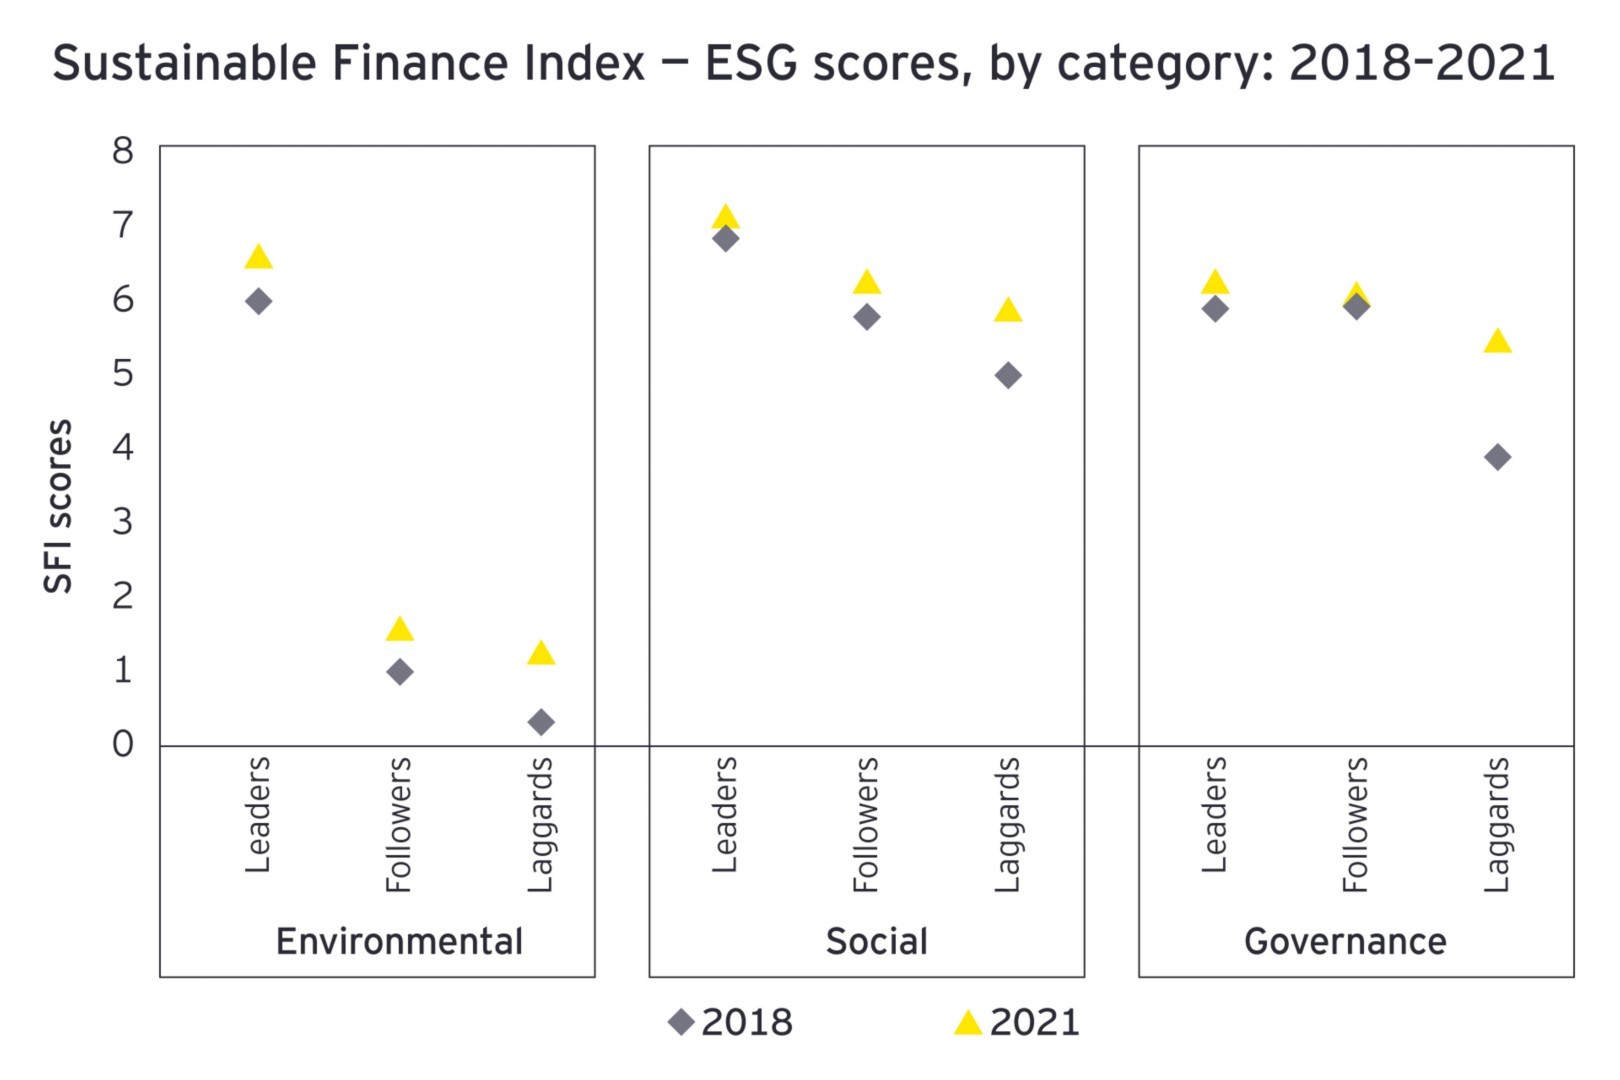 Sustainable Finance Index - ESG Scores by Category: 2018 - 2021